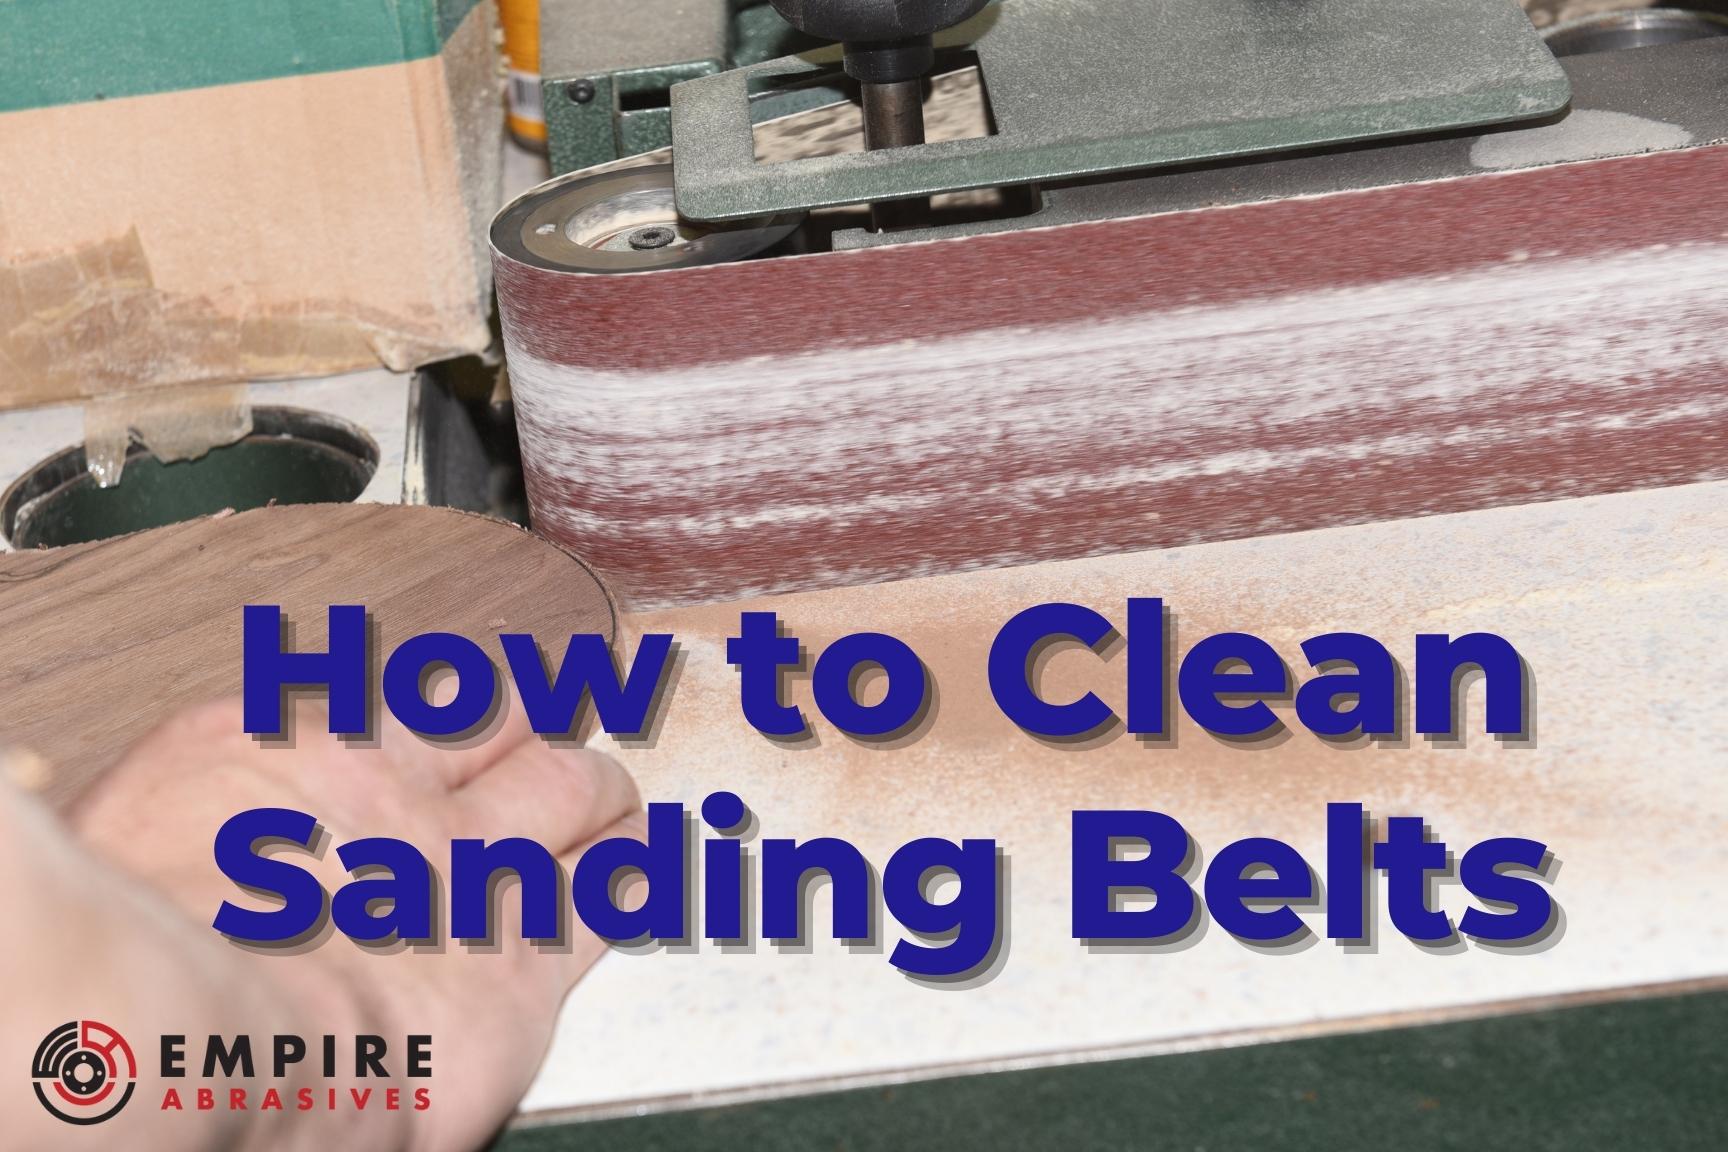 How To Clean Sanding Belts and Tips to Extend Belt Life